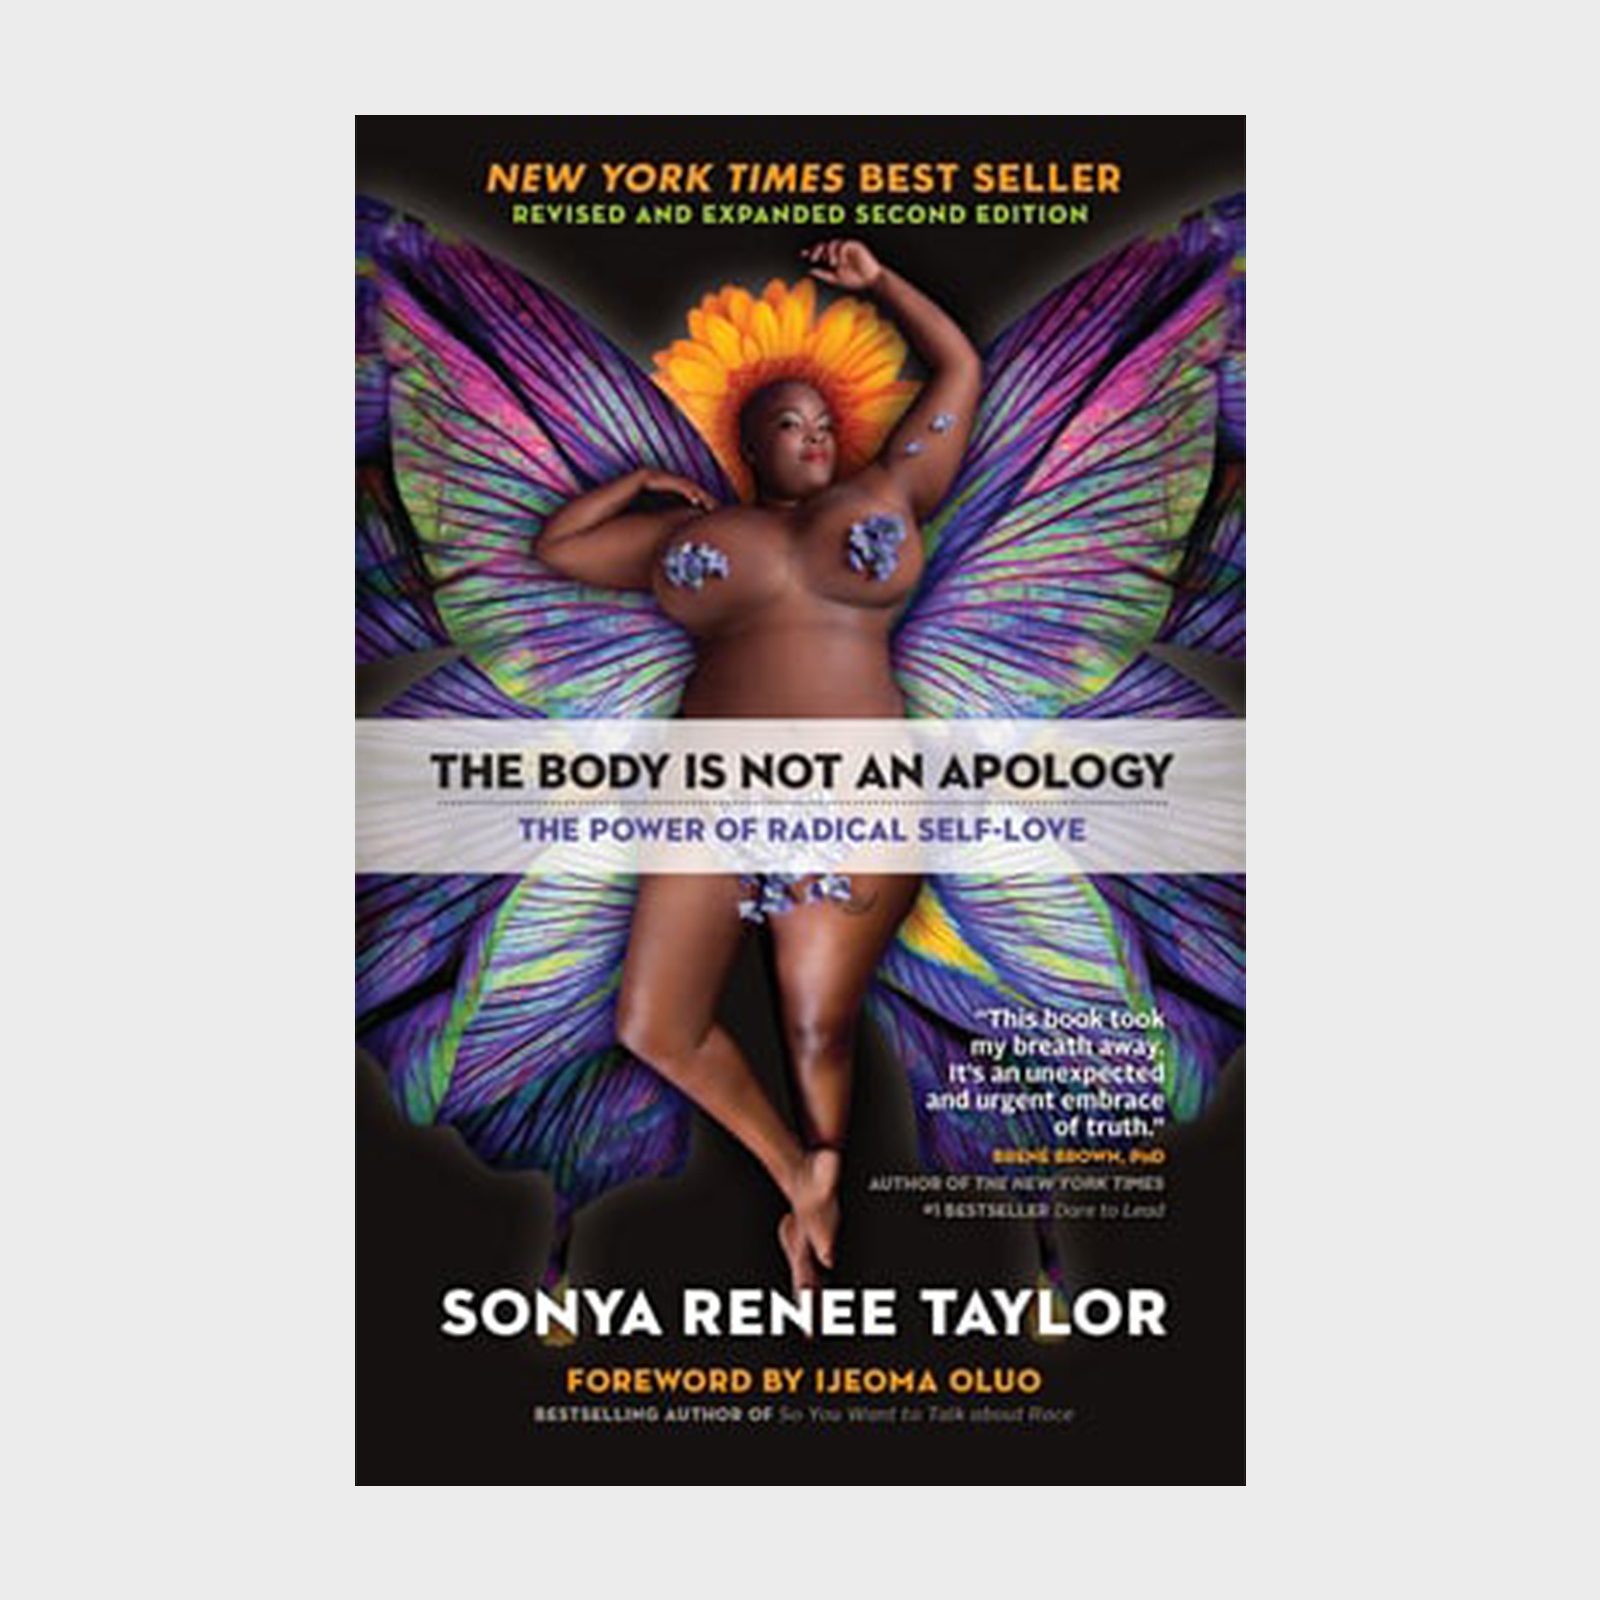 <p>If you've heard of the term "radical self-love" but haven't practiced it yet, this 2018 <em>New York Times</em> best seller is waiting for you. We've all experienced negative self-talk or insecurity about some aspect of our appearance. Where does this come from? Sonya Renee Taylor, an activist and <a href="https://www.rd.com/list/best-poetry-books/">poet</a>, uses beautiful prose to help us identify the societal constructs that tell us we are not good enough and walks us on a path of love and acceptance that allows us to also love and accept others. A quick read with lasting impact, this is a self-development book that has the power to heal more than just the self—it's a book that can lead to unity across communities.</p> <p class="listicle-page__cta-button-shop"><a class="shop-btn" href="https://bookshop.org/books/the-body-is-not-an-apology-the-power-of-radical-self-love/9781523090990">Shop Now</a></p>